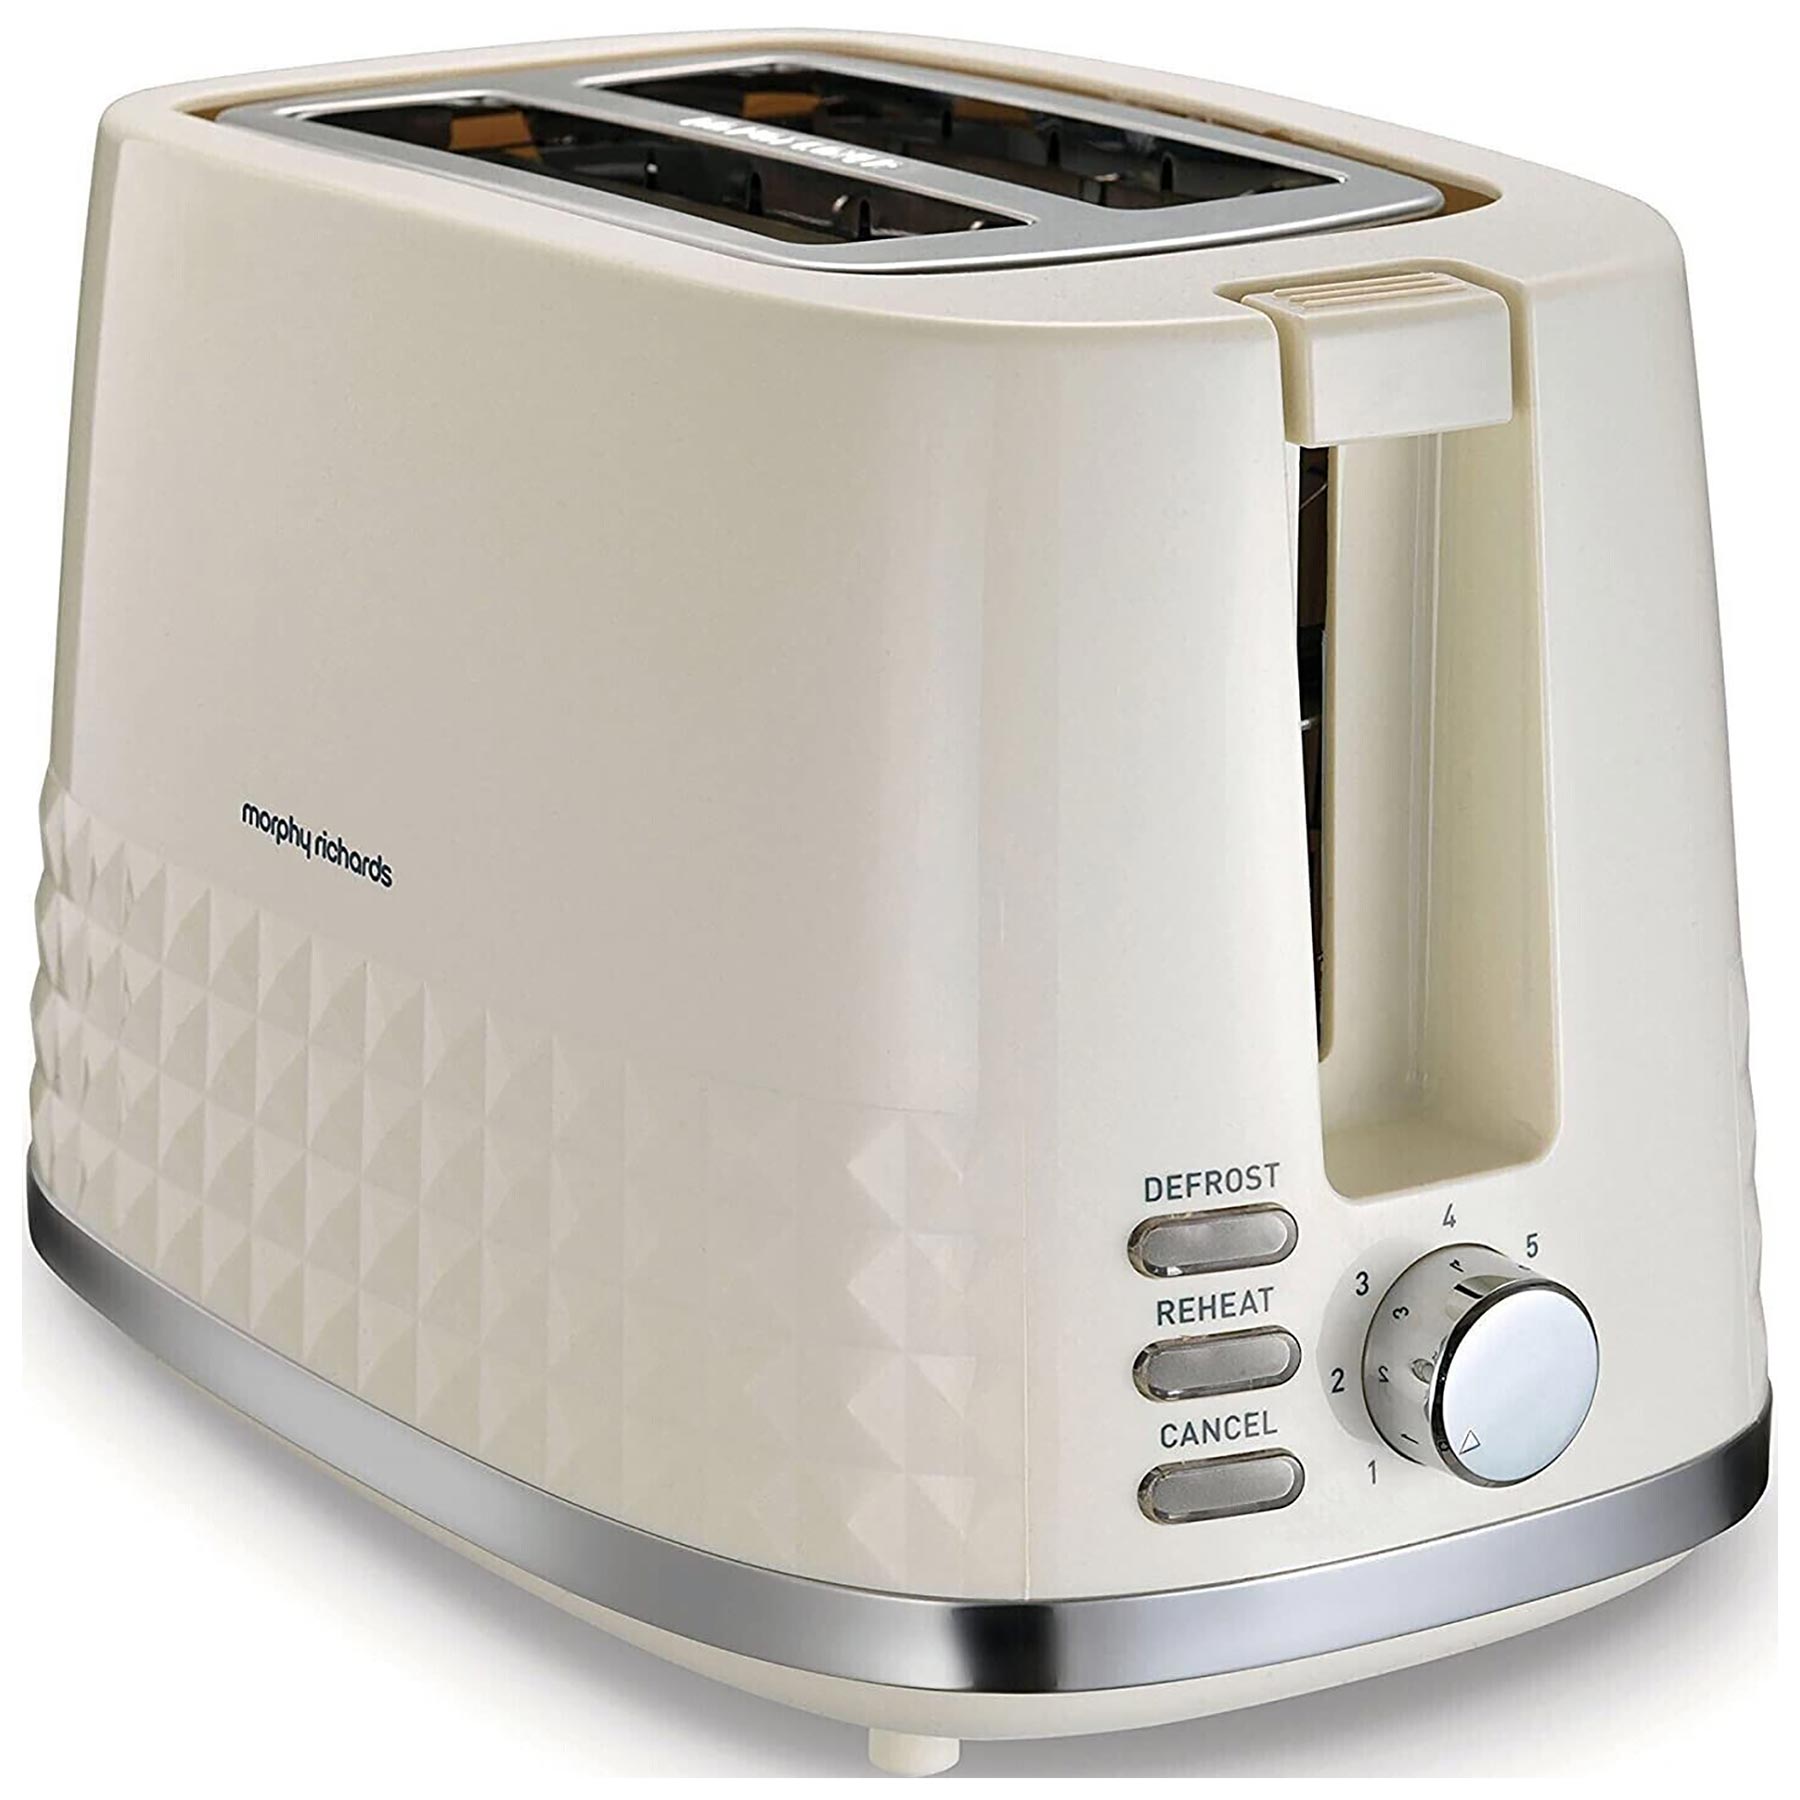 Image of Morphy Richards 220022 Dimensions 2 Slice Toaster Cream